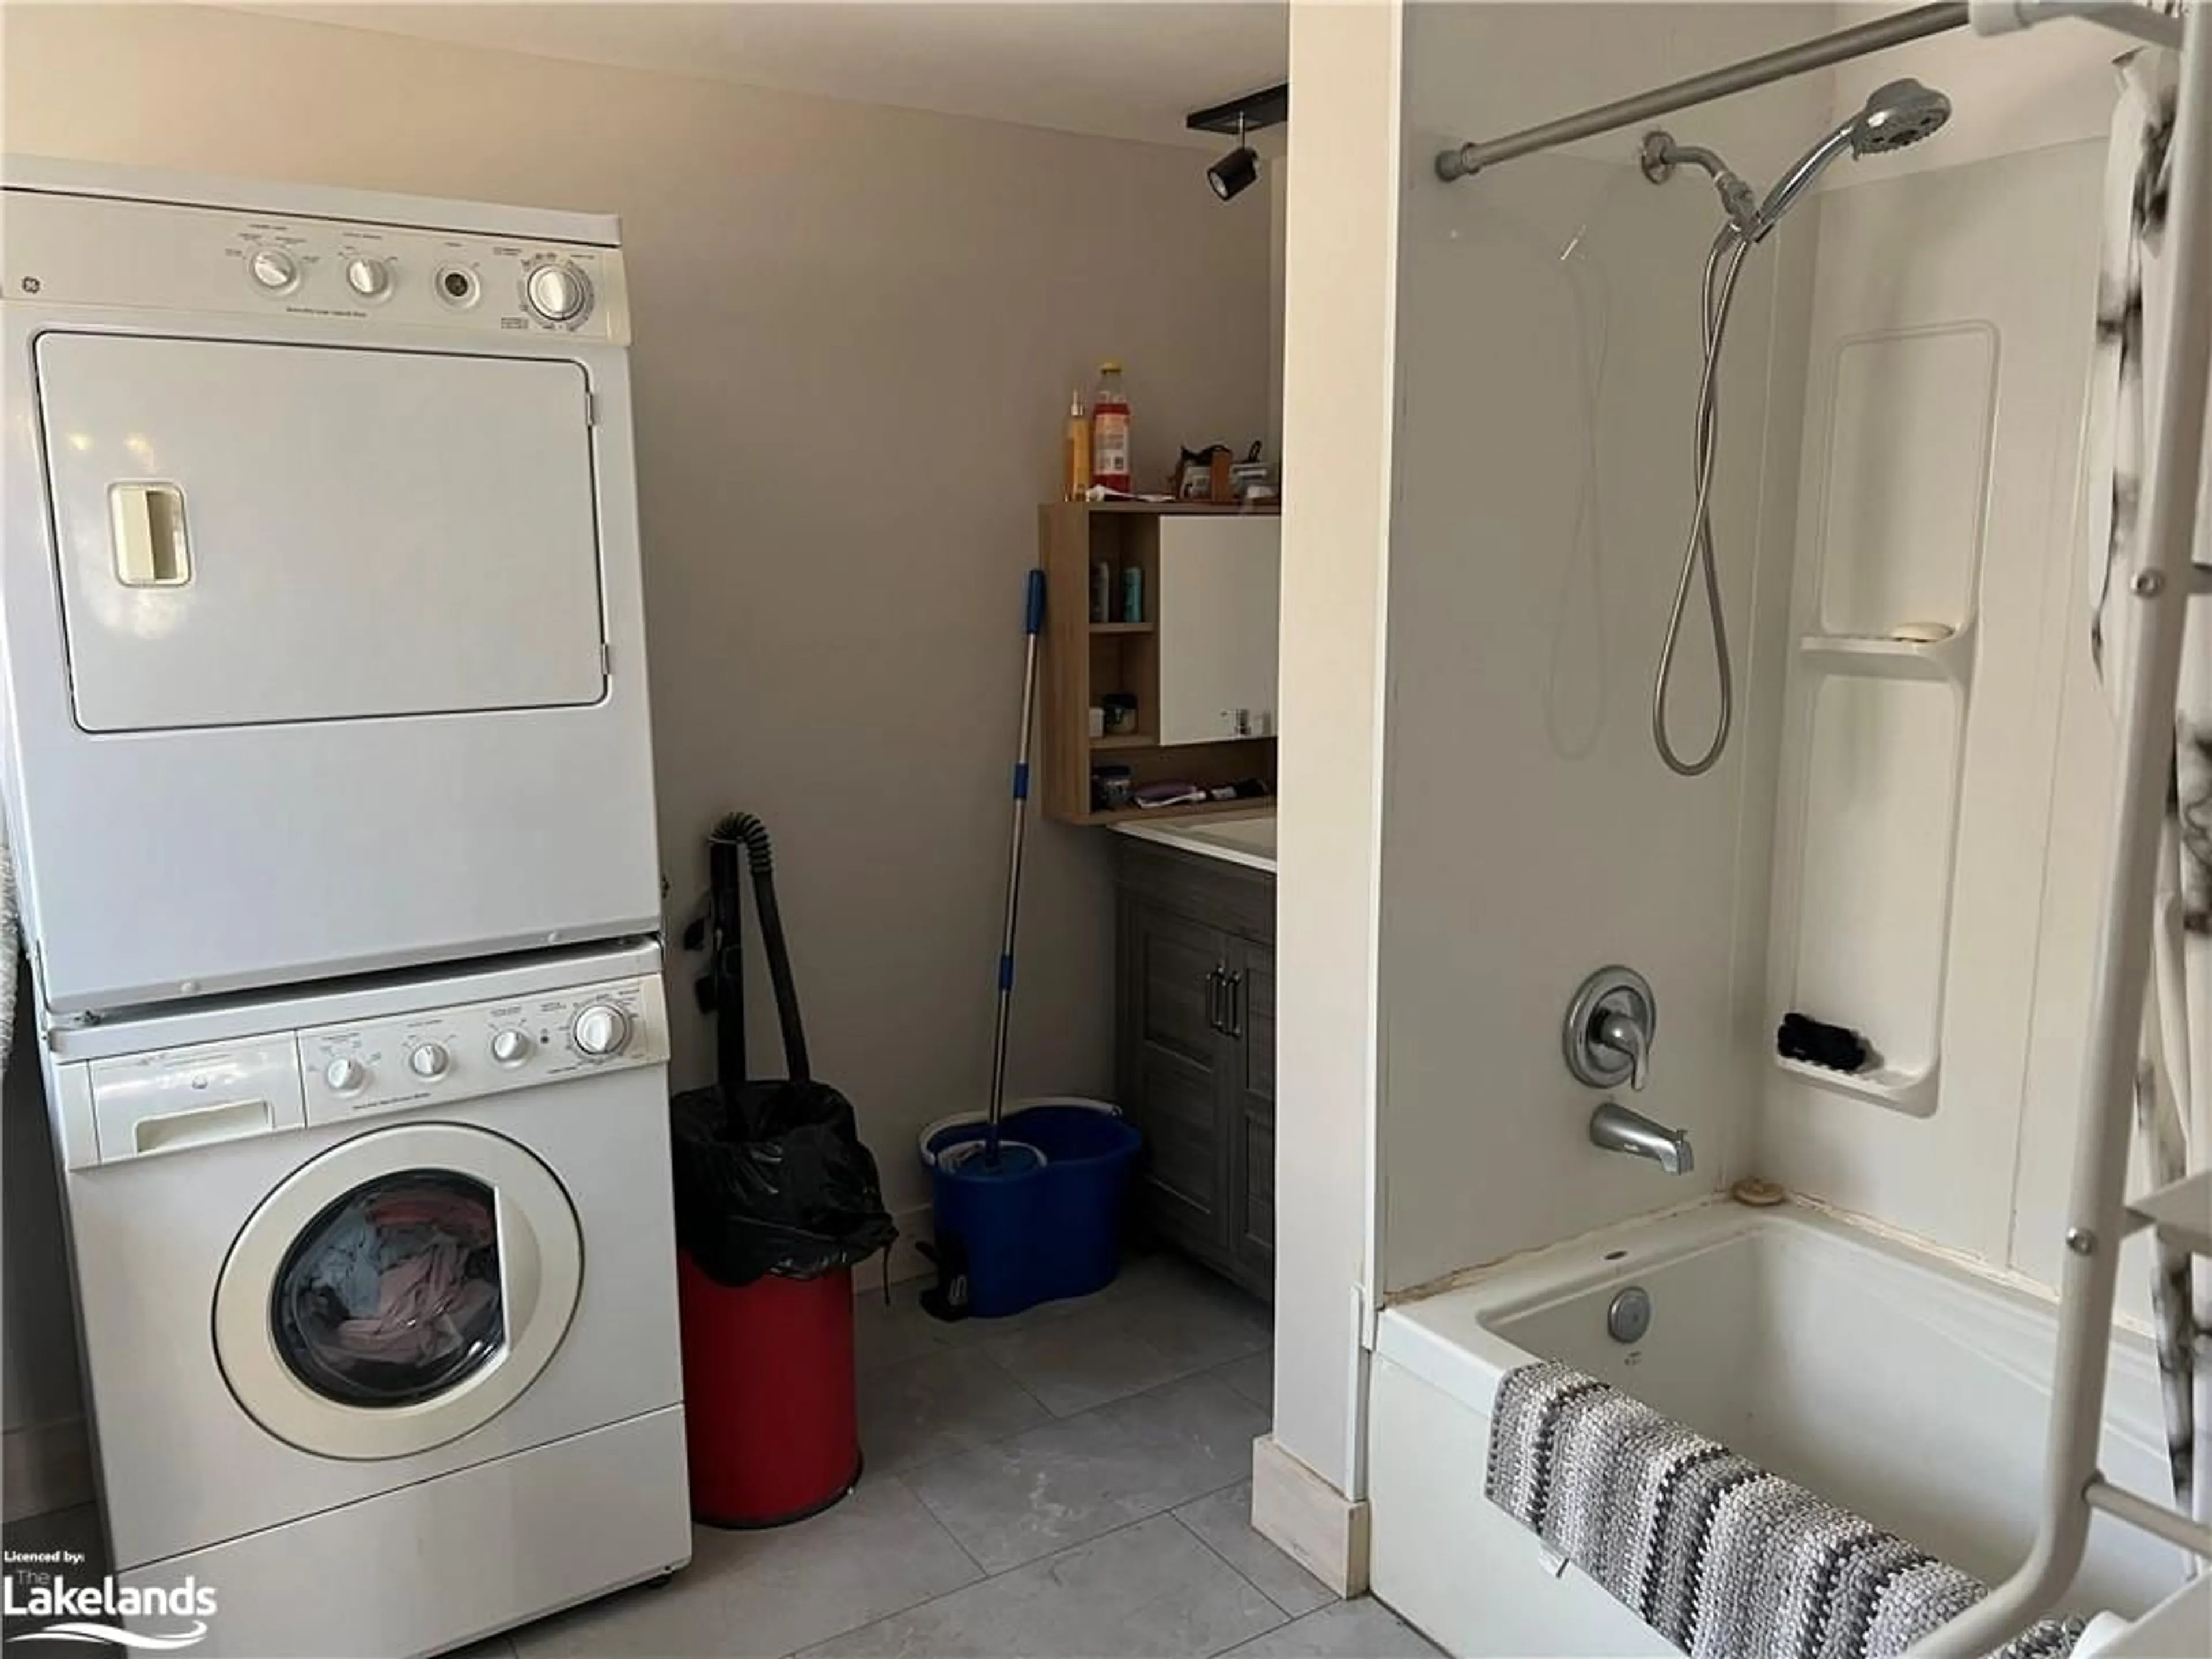 Laundry room for 25 Macfarlane St, Parry Sound Ontario P2A 2N3